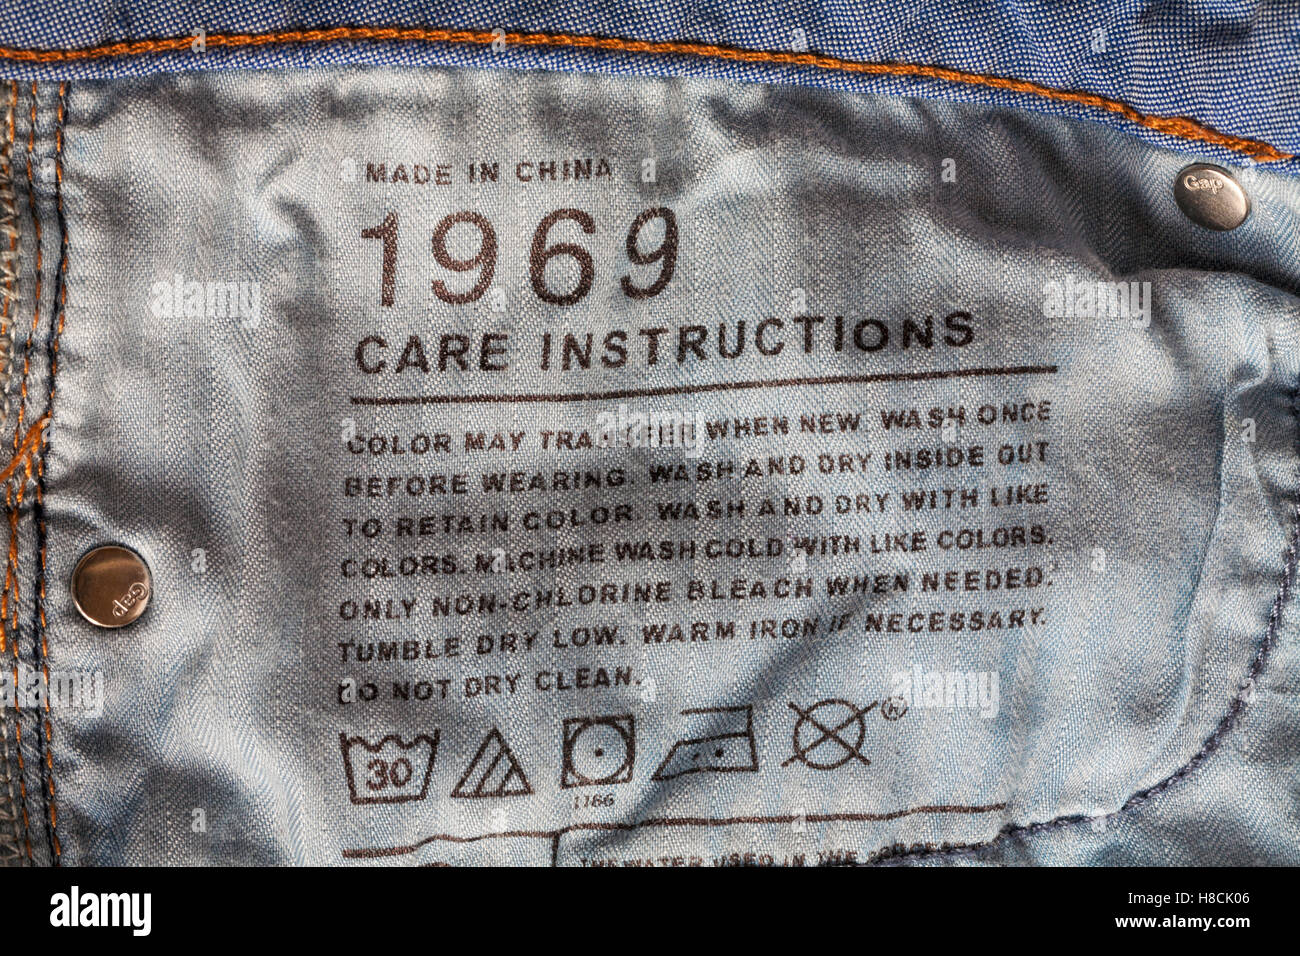 Care instructions stamped in GAP 1969 denim jeans made in China Stock Photo